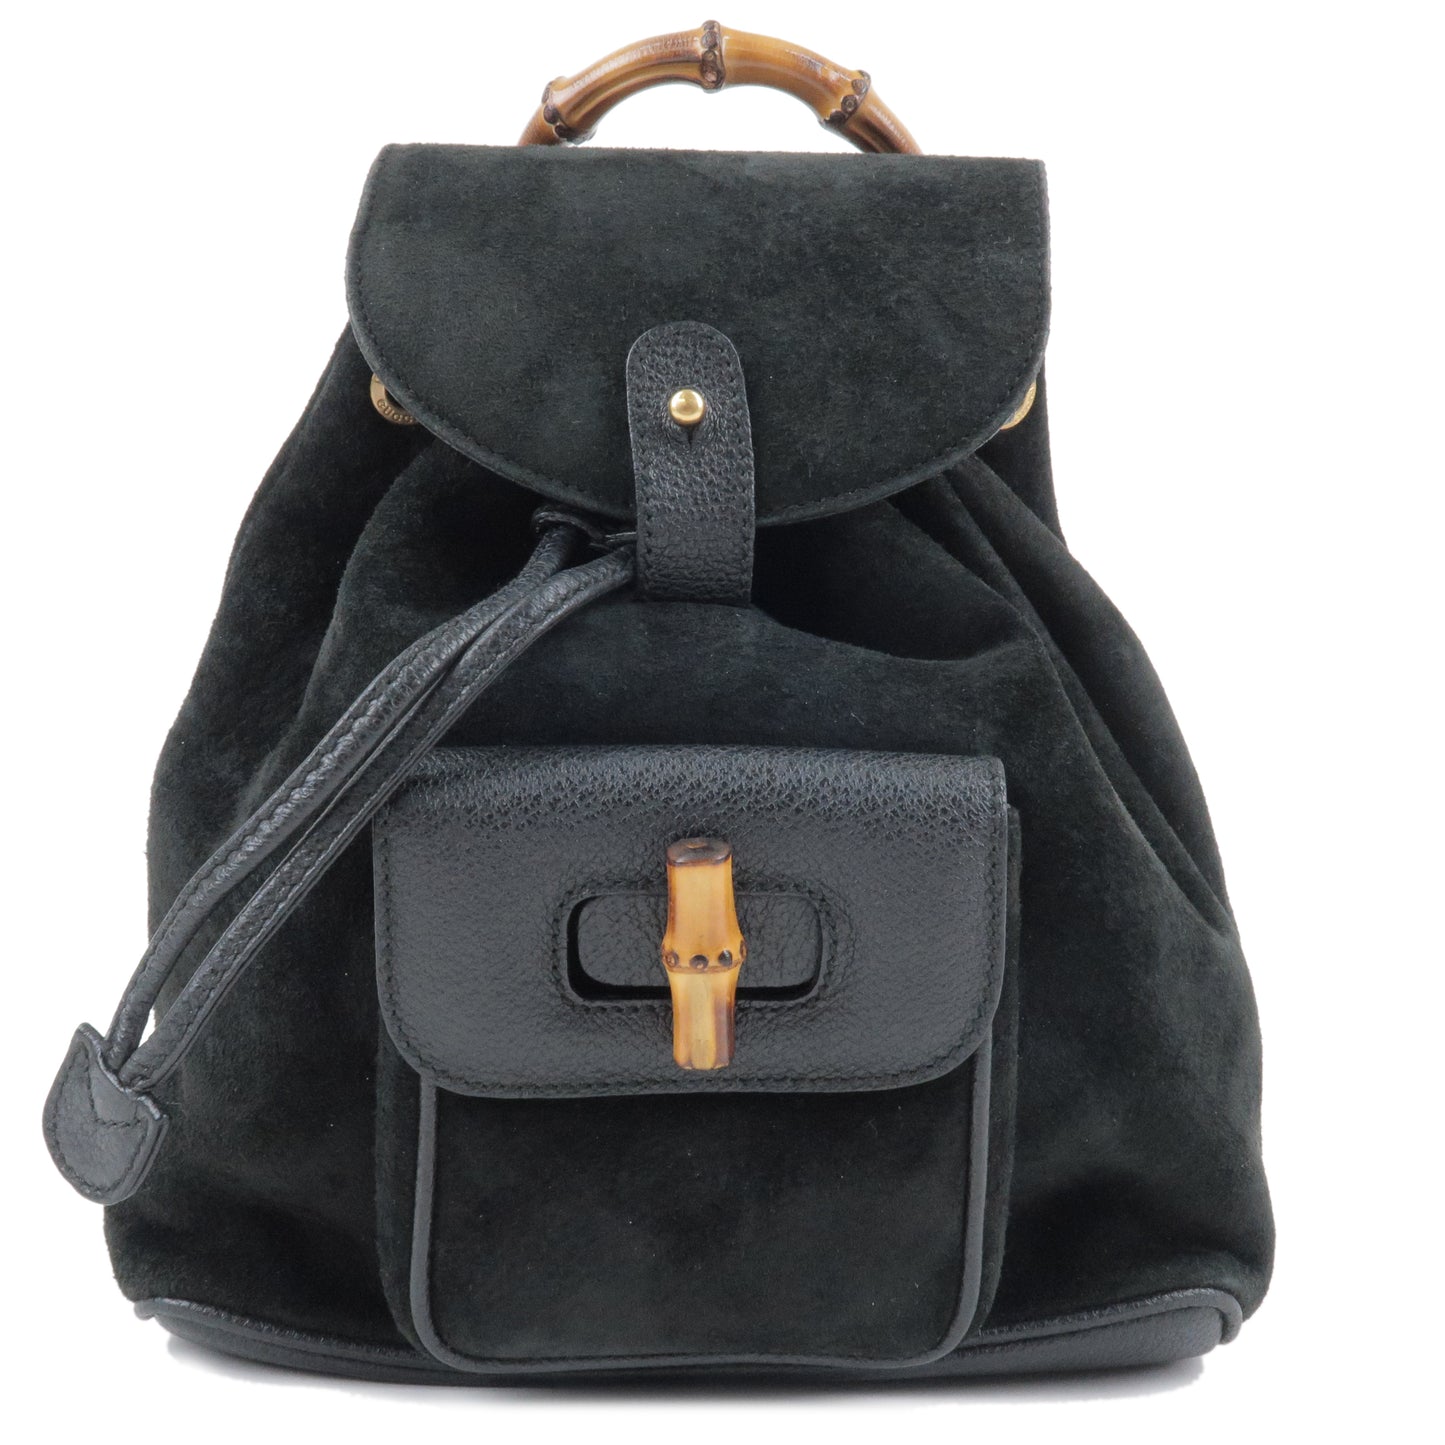 GUCCI-Bamboo-Back-Pack-Suede-Leather-Black-003.3444.0030